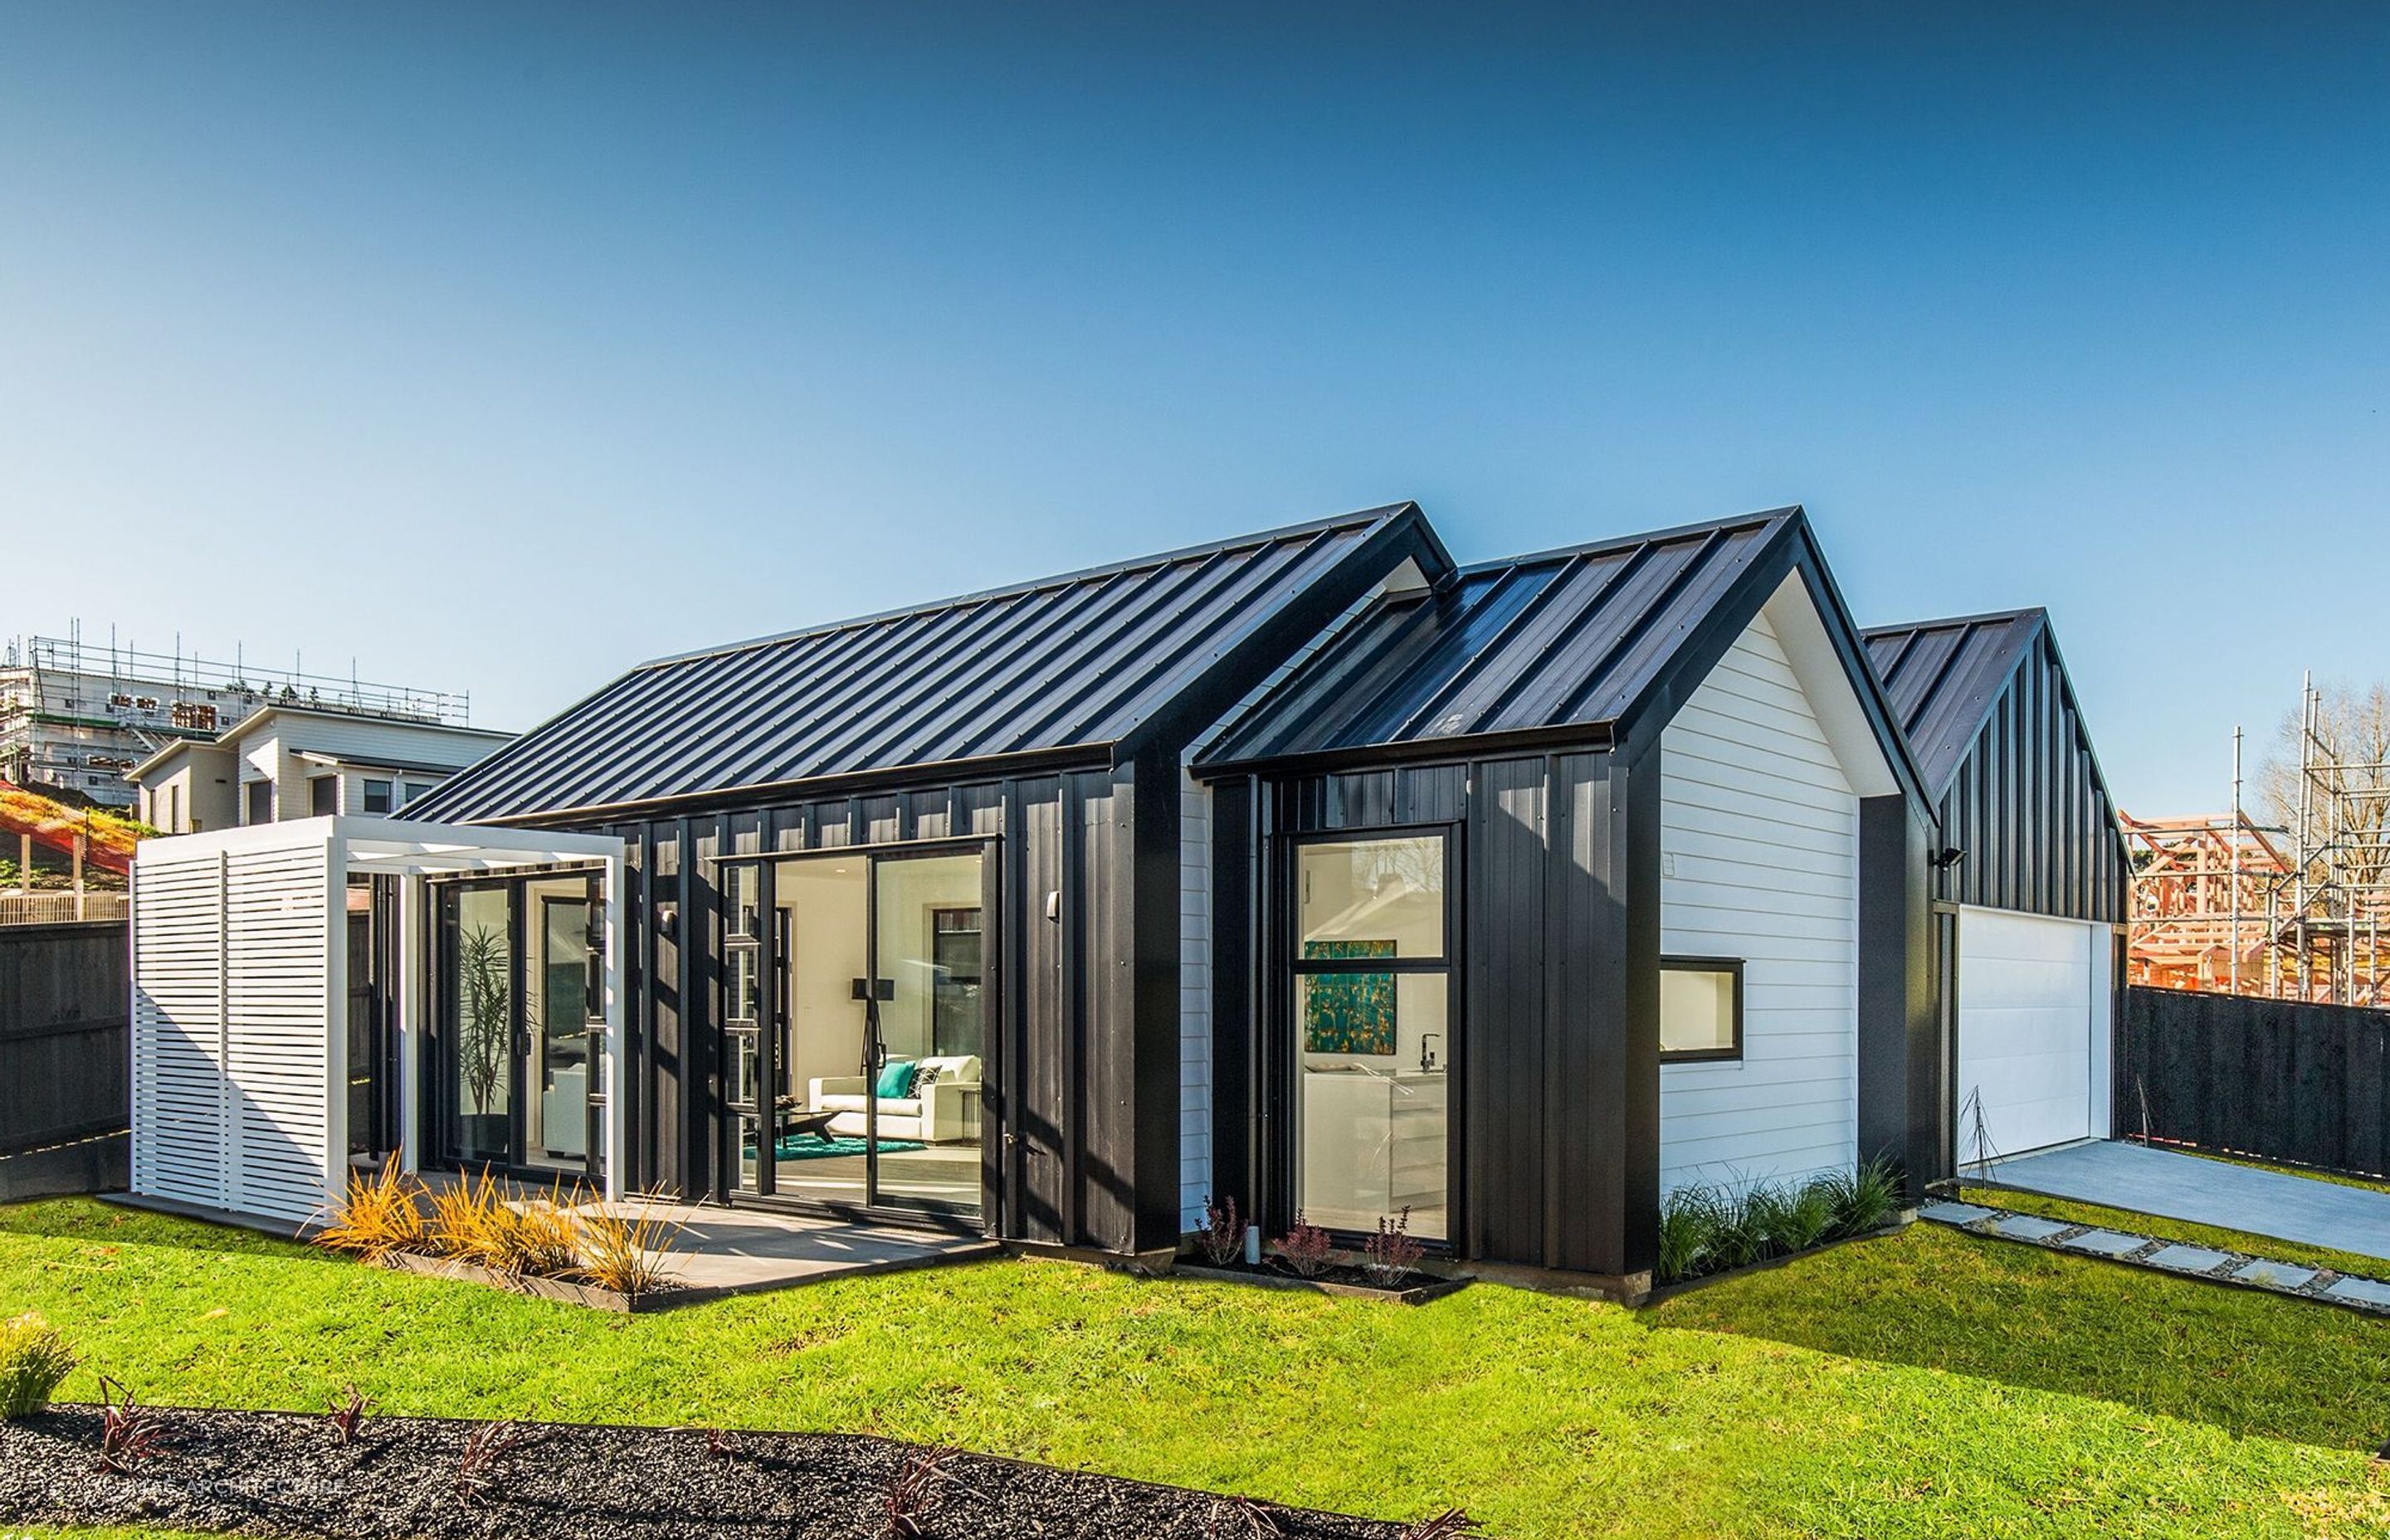 The contrast of black Solar-Rib cladding and white is a simple yet powerful design.